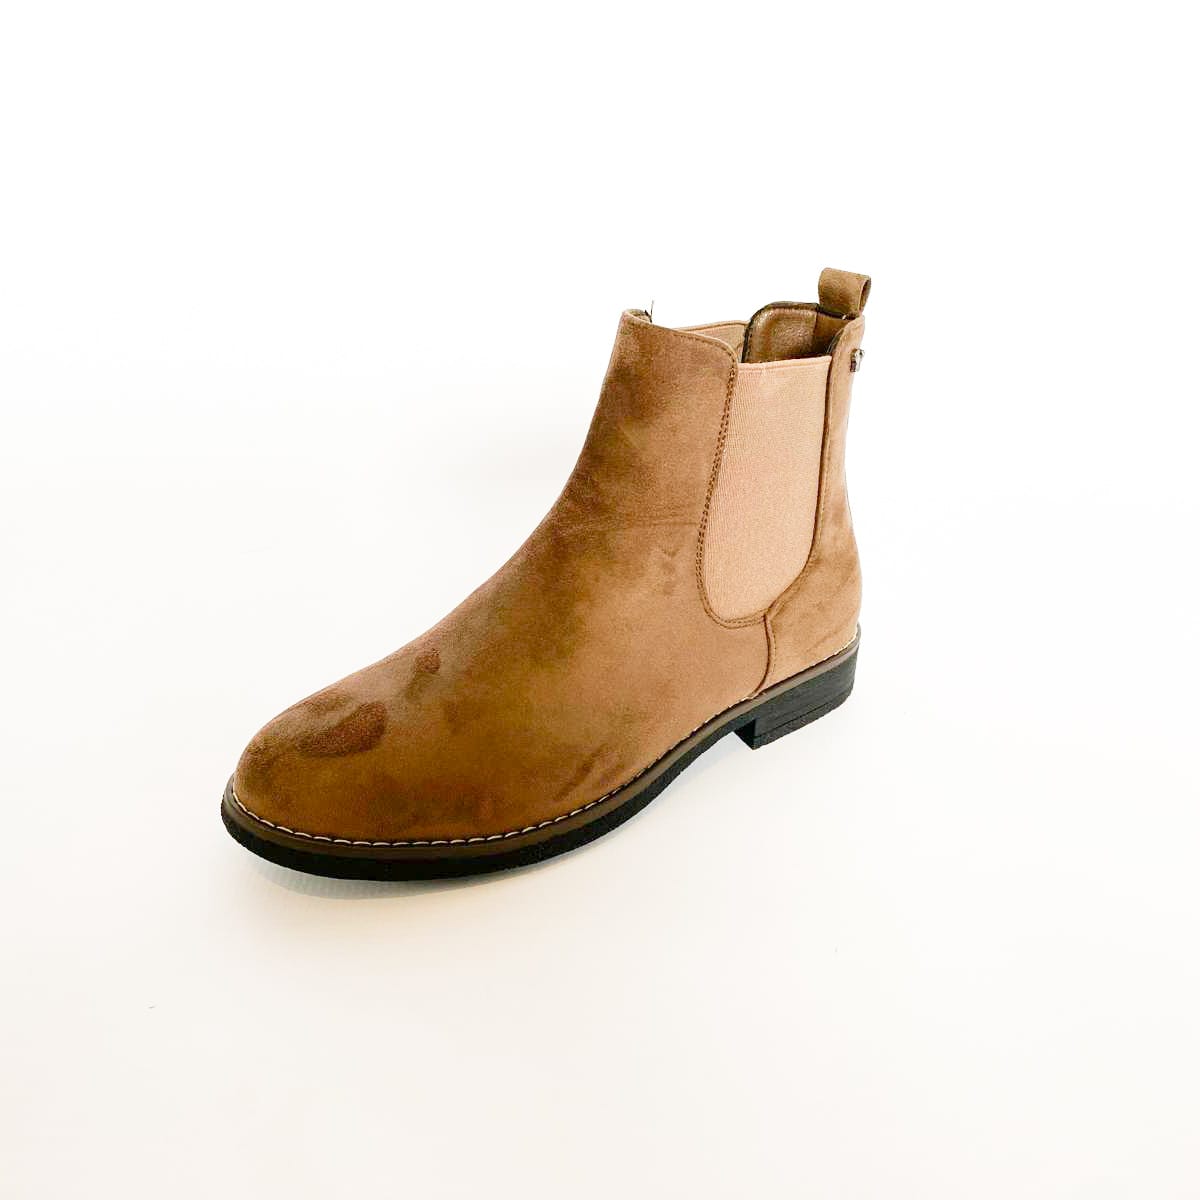 Butterfly Celeste 1 brown short suede boot